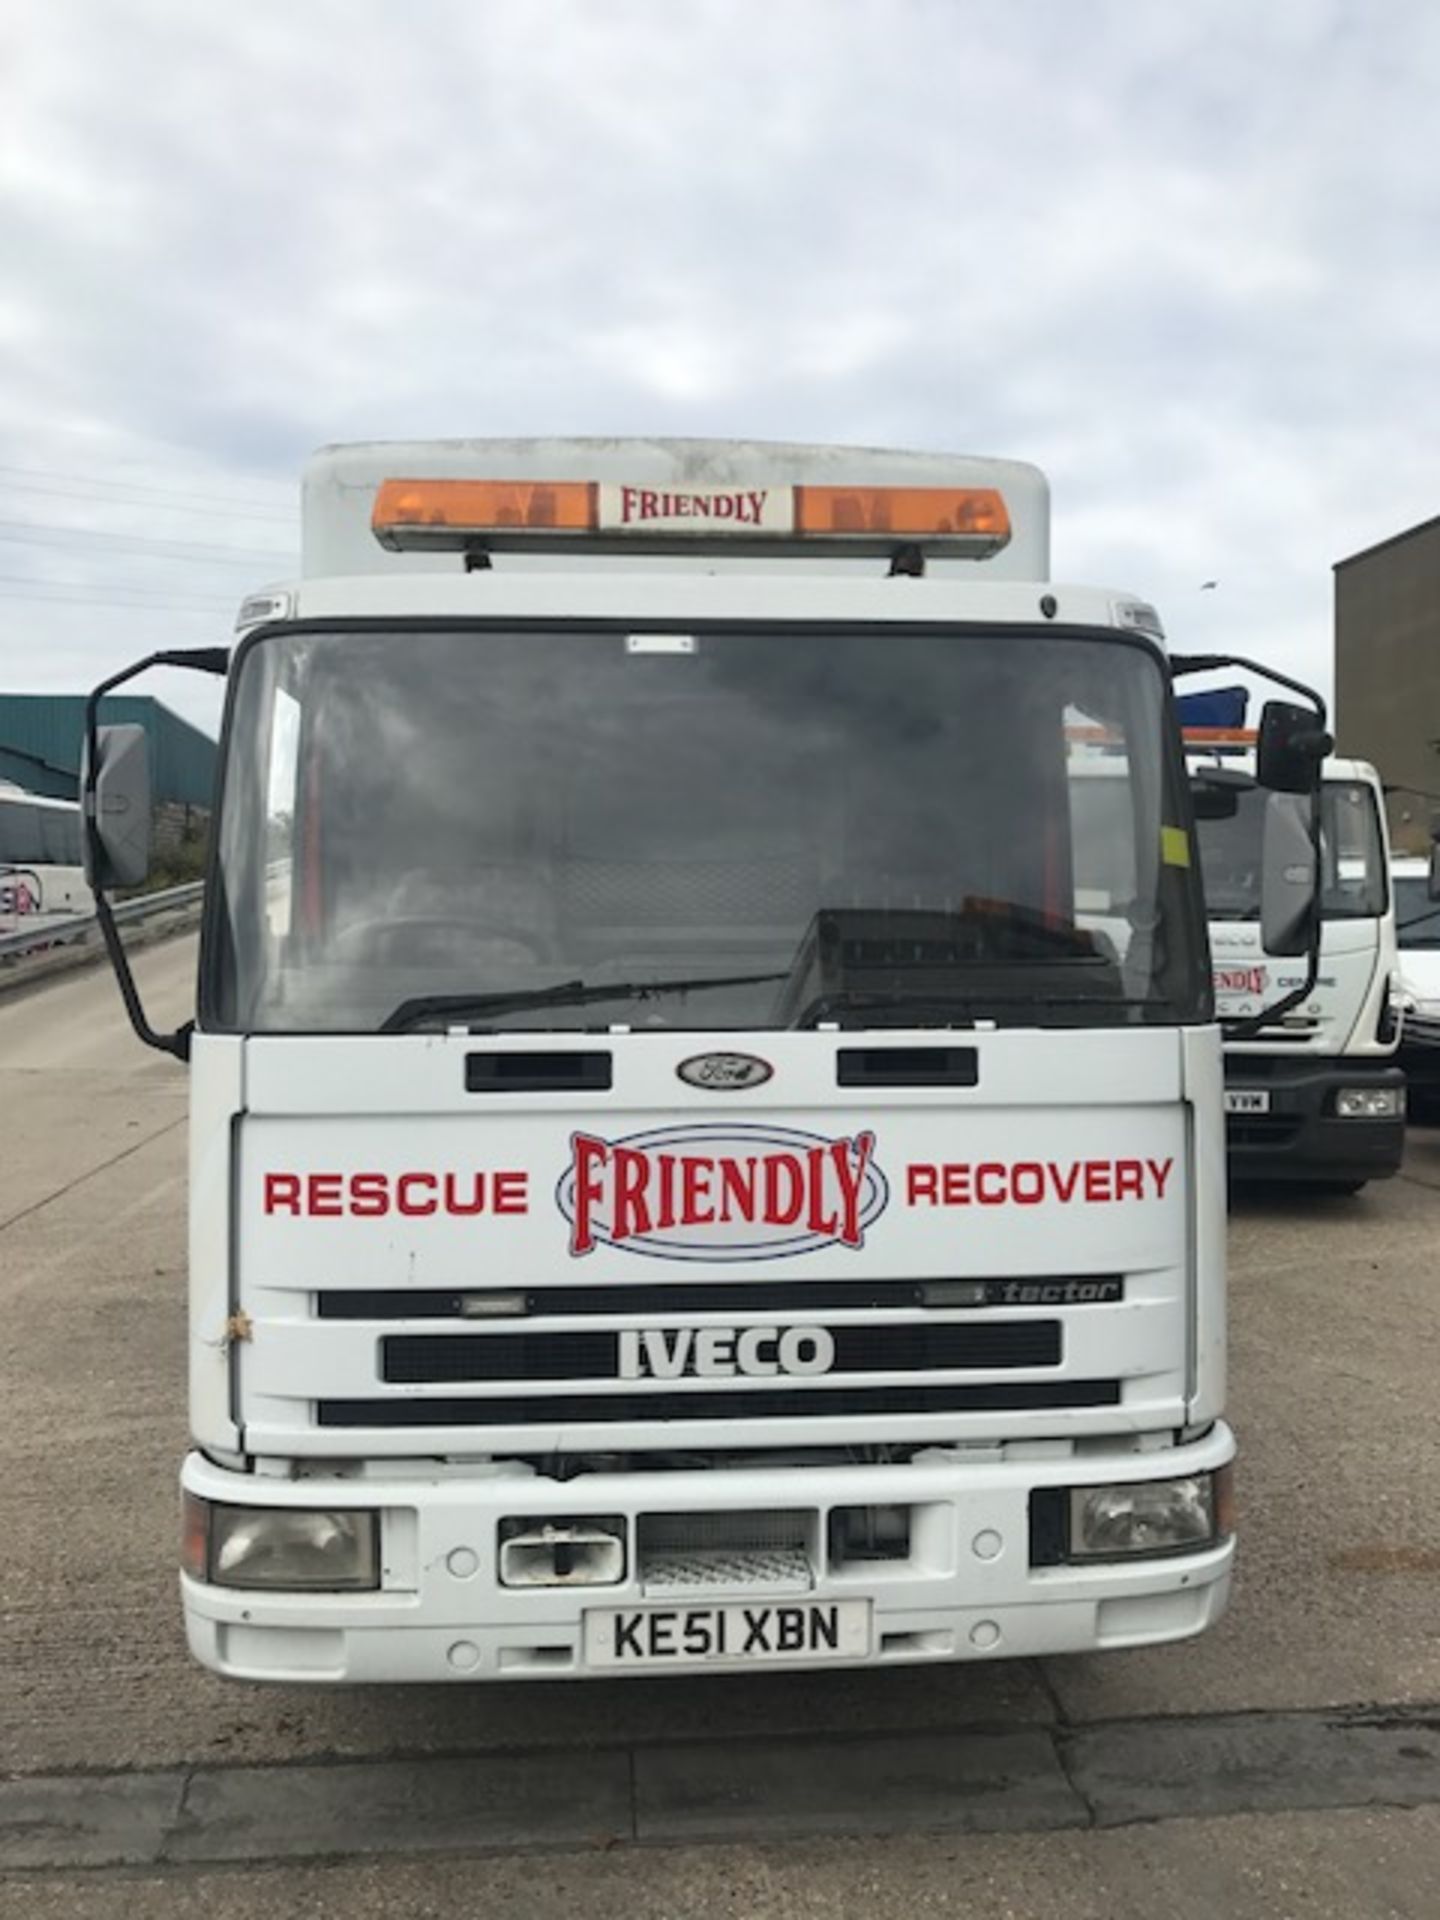 2002 Iveco Tertor 75E17 7.4T Emergency Response rollover unit complete with tail lift and - Image 2 of 26